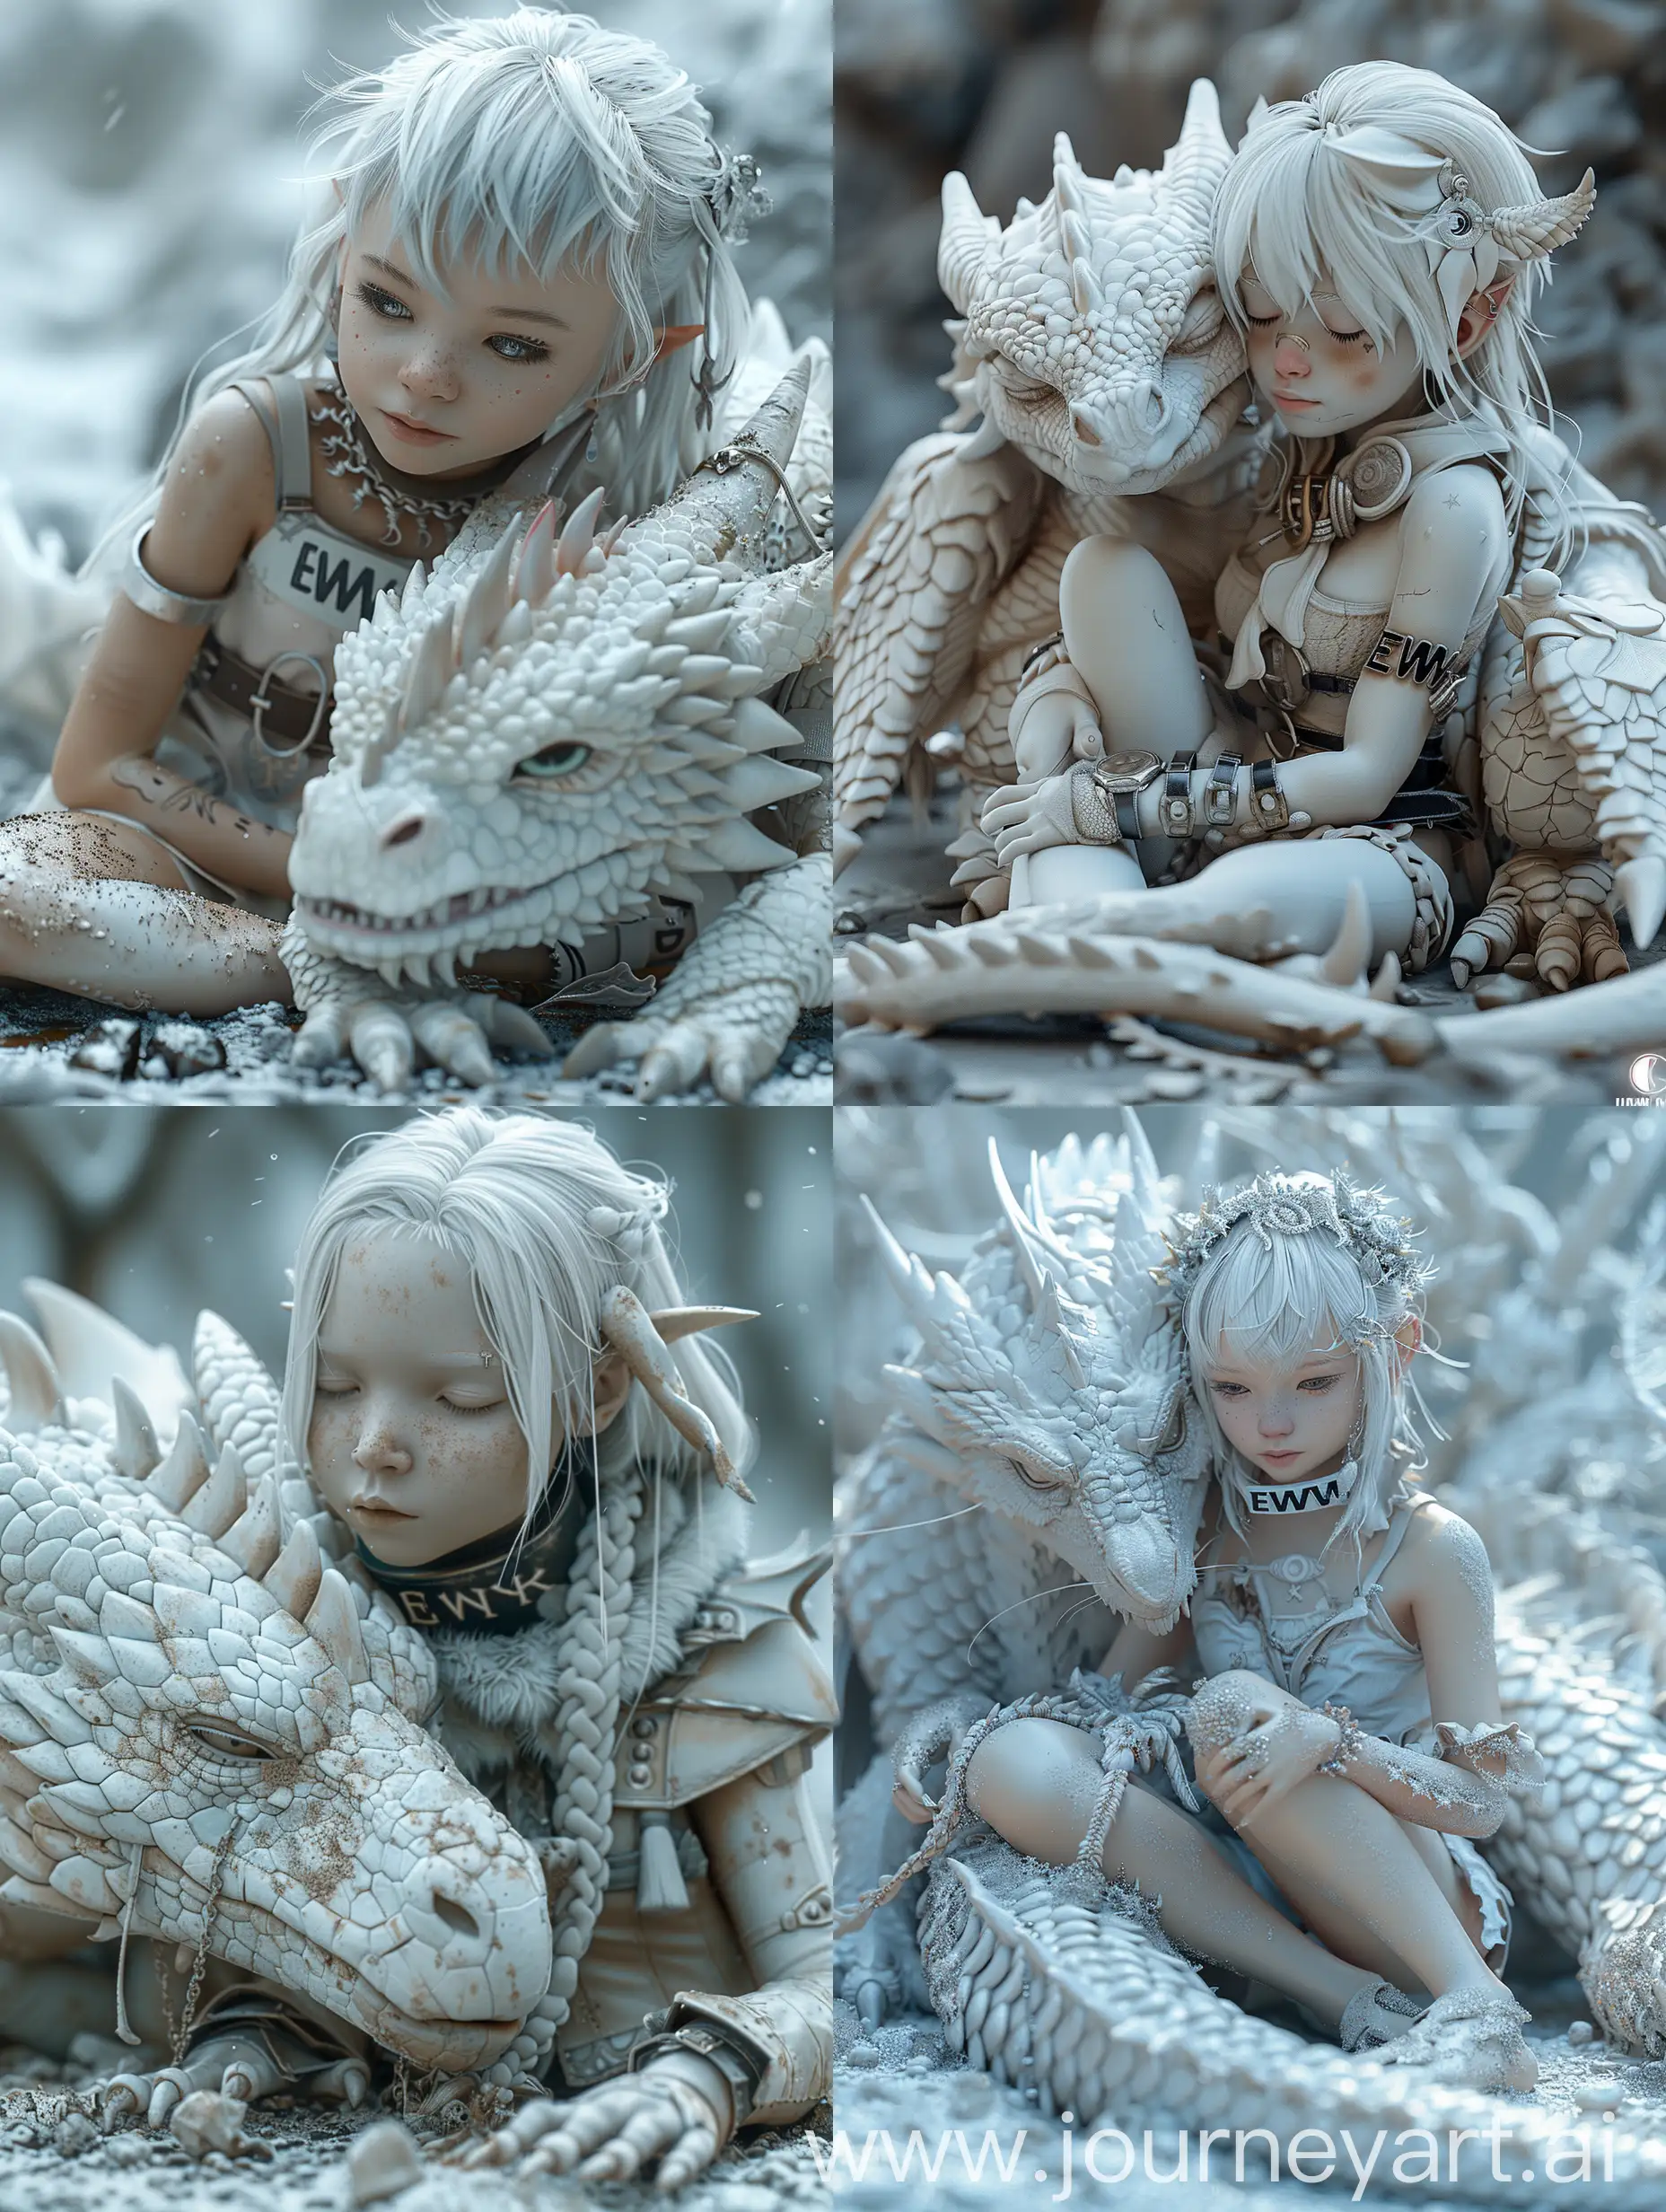 UltraWide-Angle-WhiteHaired-Girl-and-White-Dragon-in-a-Surreal-UltraRealistic-World